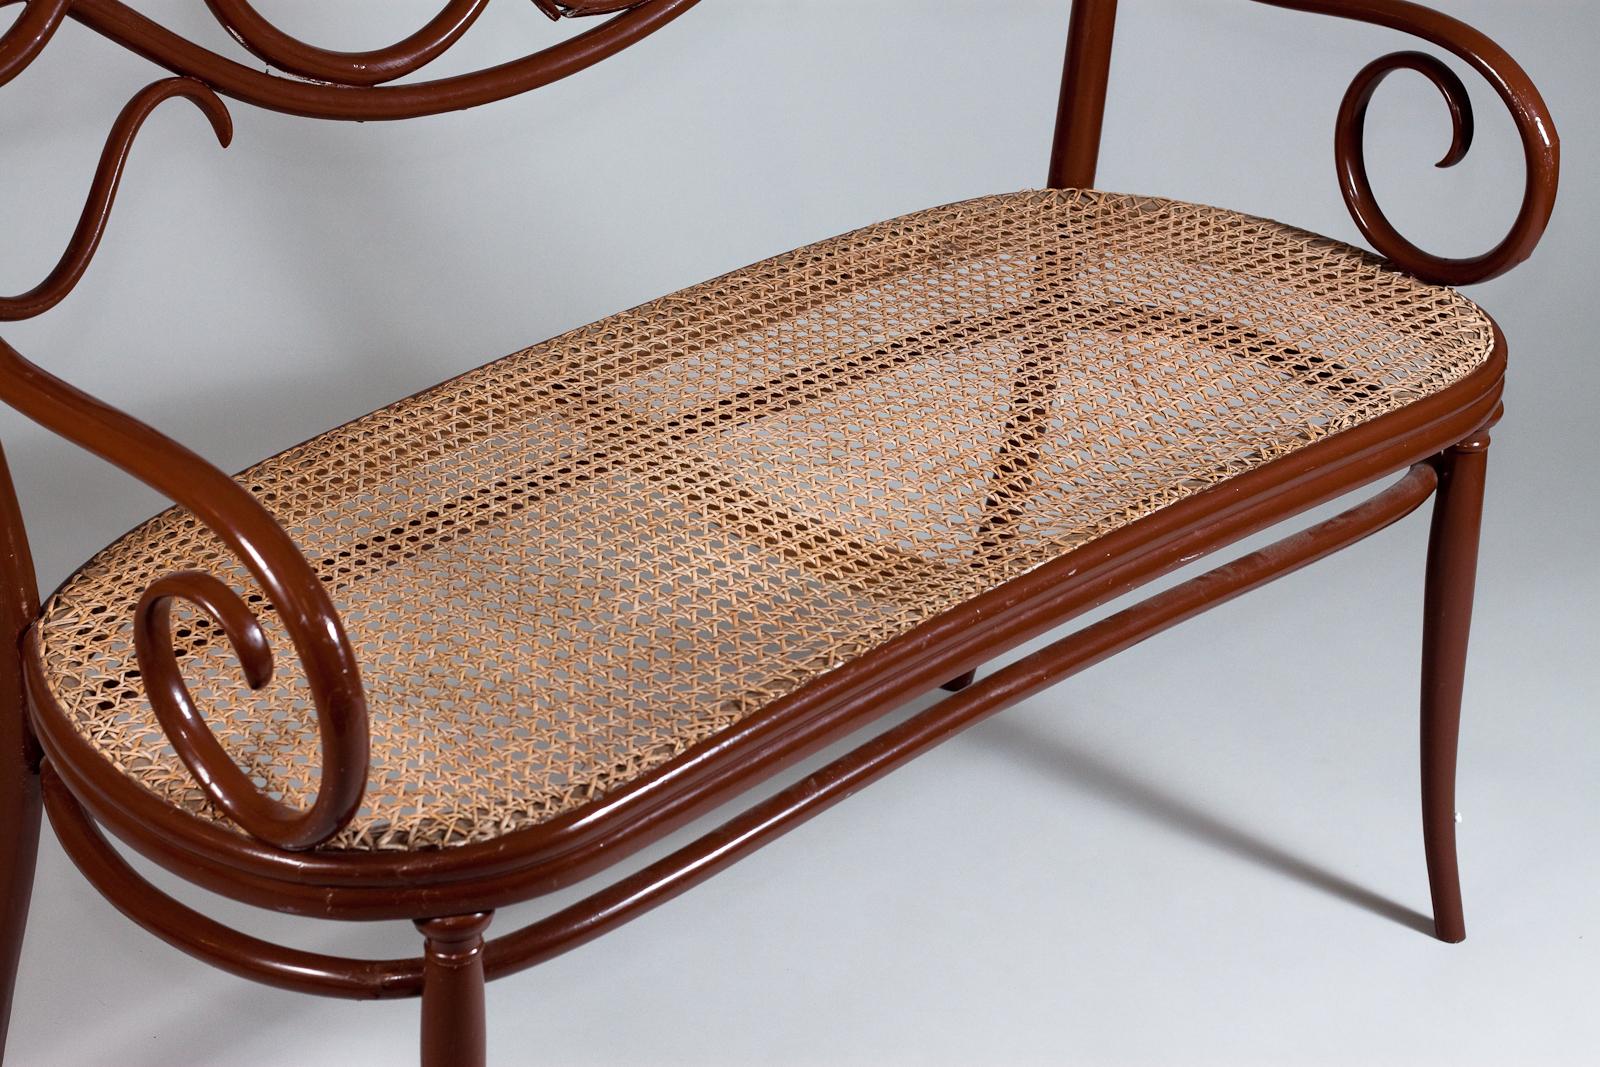 The Thonet No. 2 Bentwood Sofa, crafted in the late 19th century, is a beautiful vintage piece that exudes elegance and sophistication. This sofa is constructed entirely of bentwood and retains its original woven cane seating, which provides both